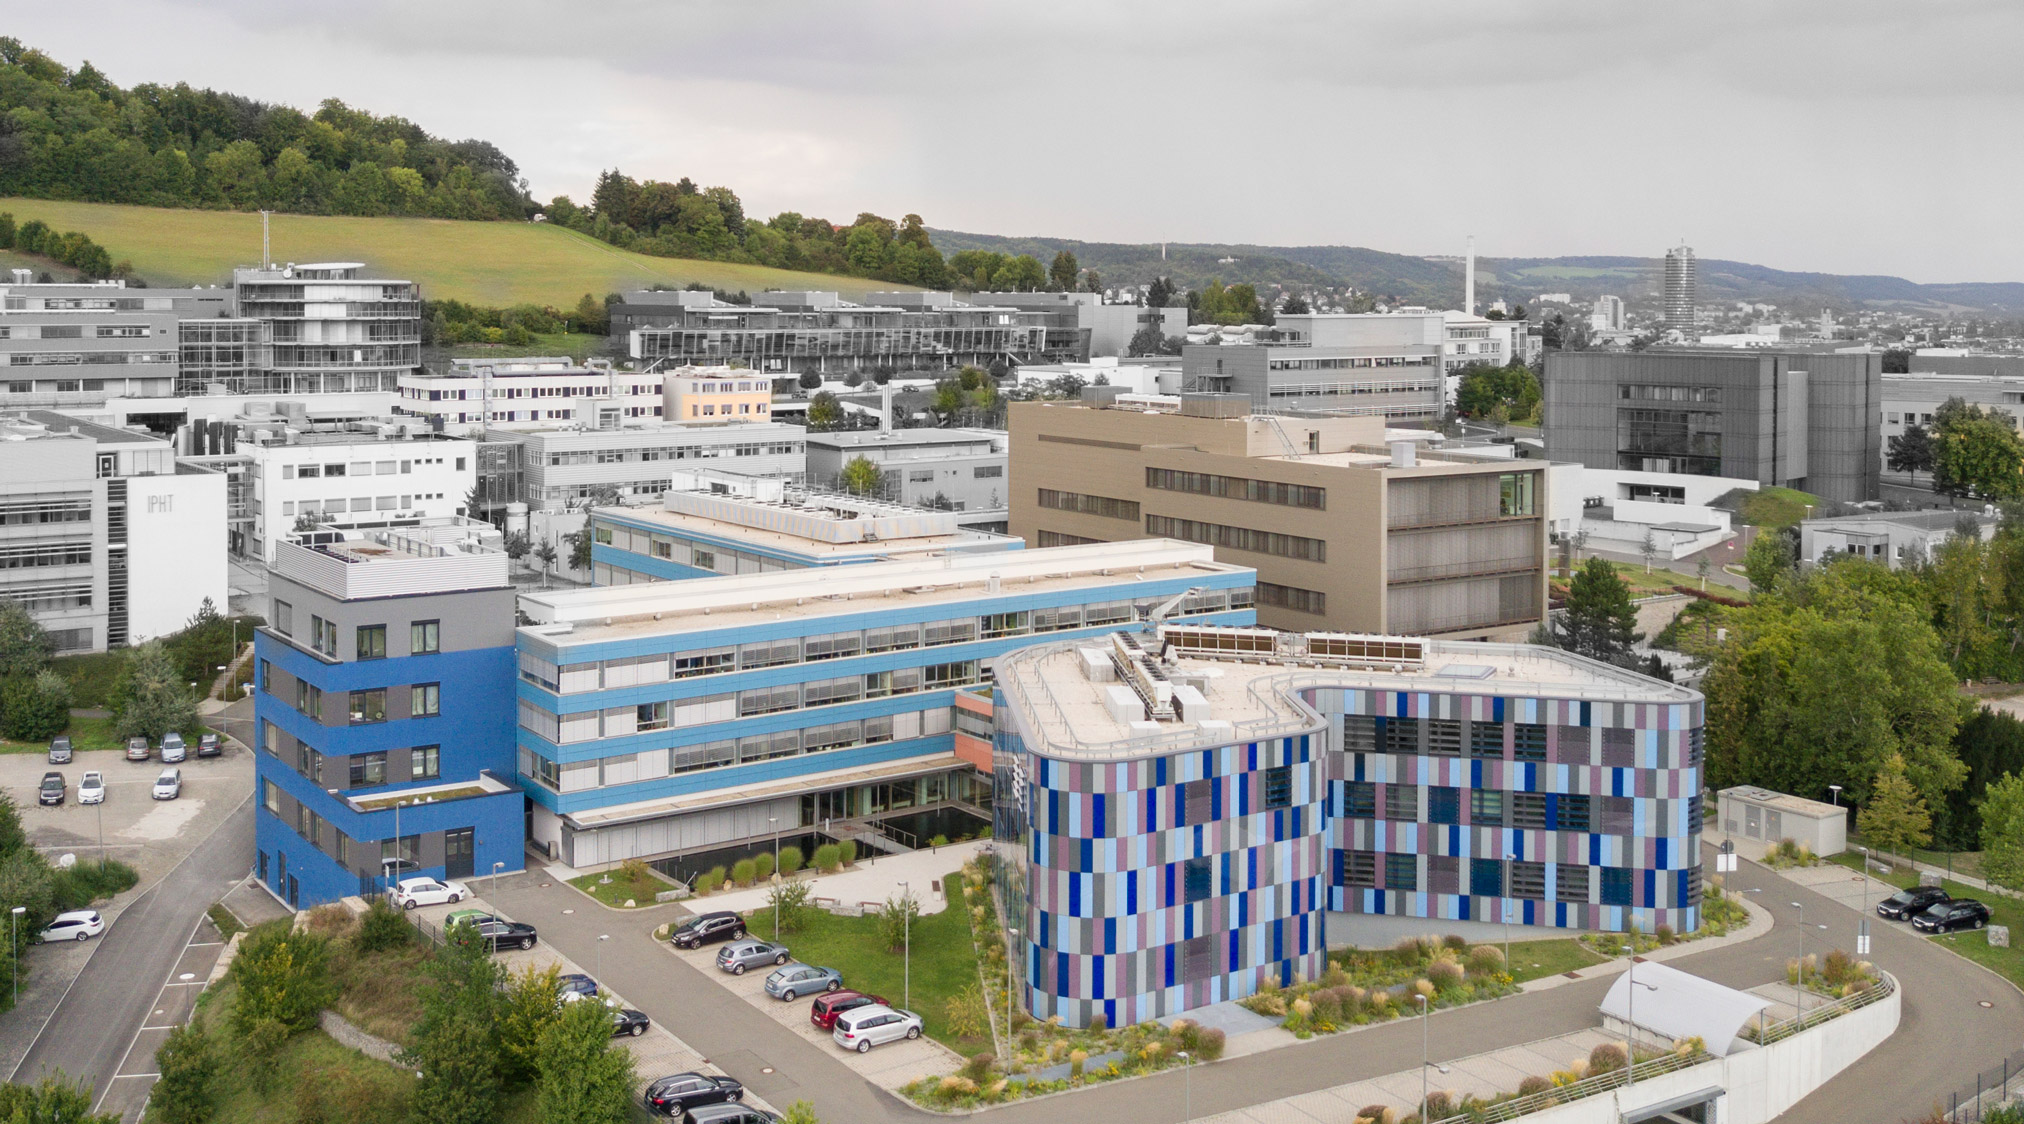 A multitude of institutes on the Beutenberg Campus in Jena